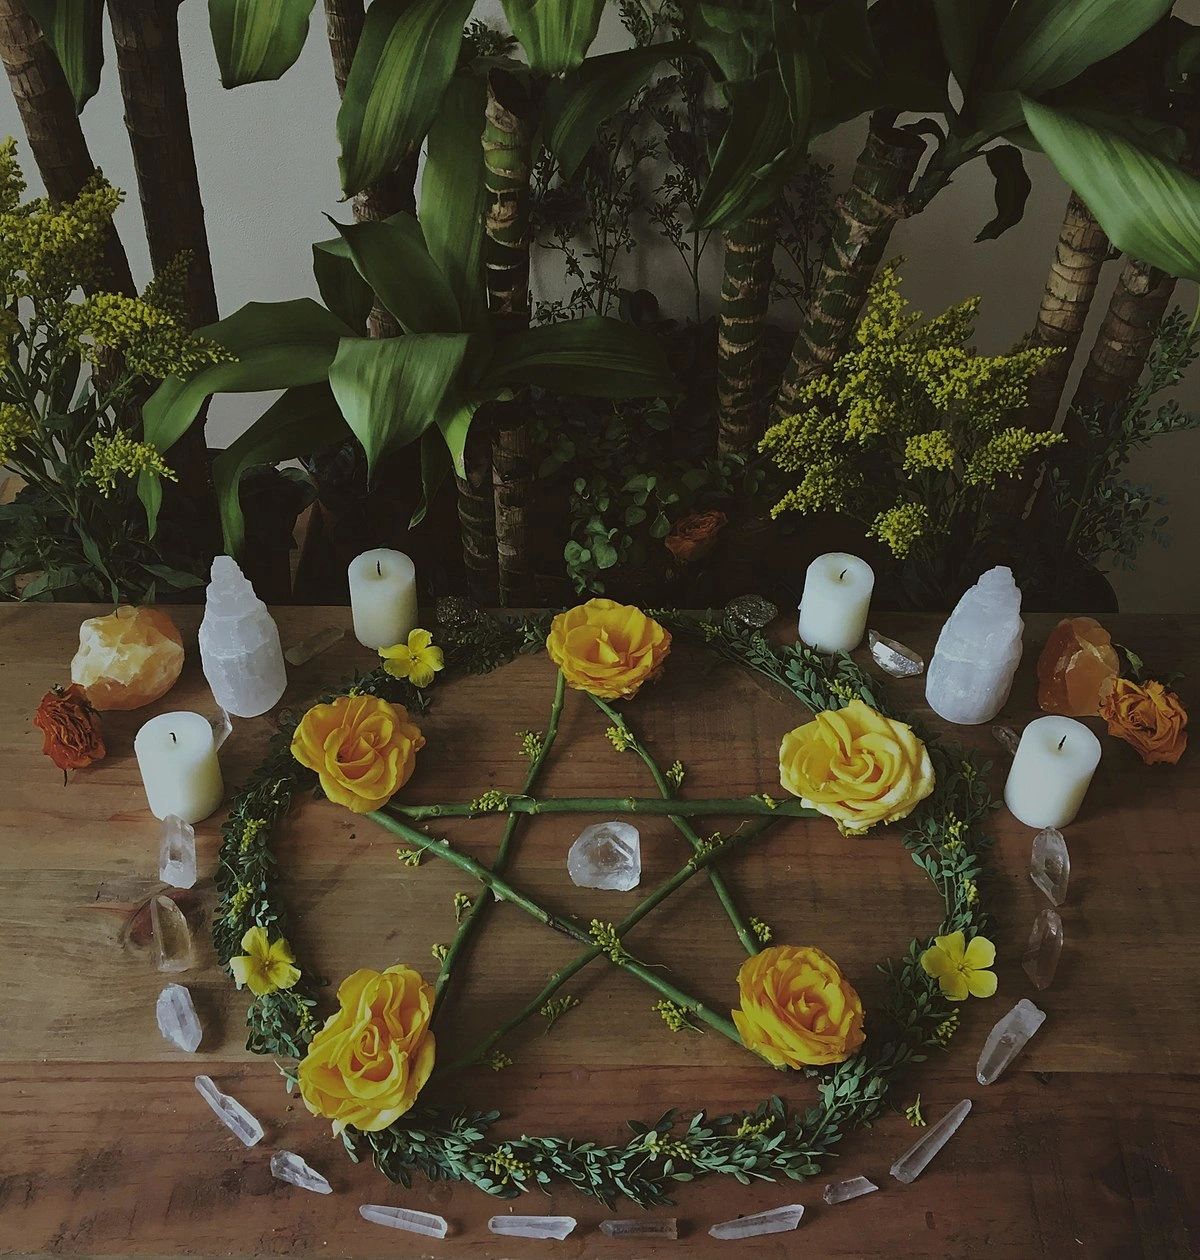 Wiccan altar pentacle, crystals, candles, flowers, the Craft, Wicca, Temple of the Twilight Goddess 